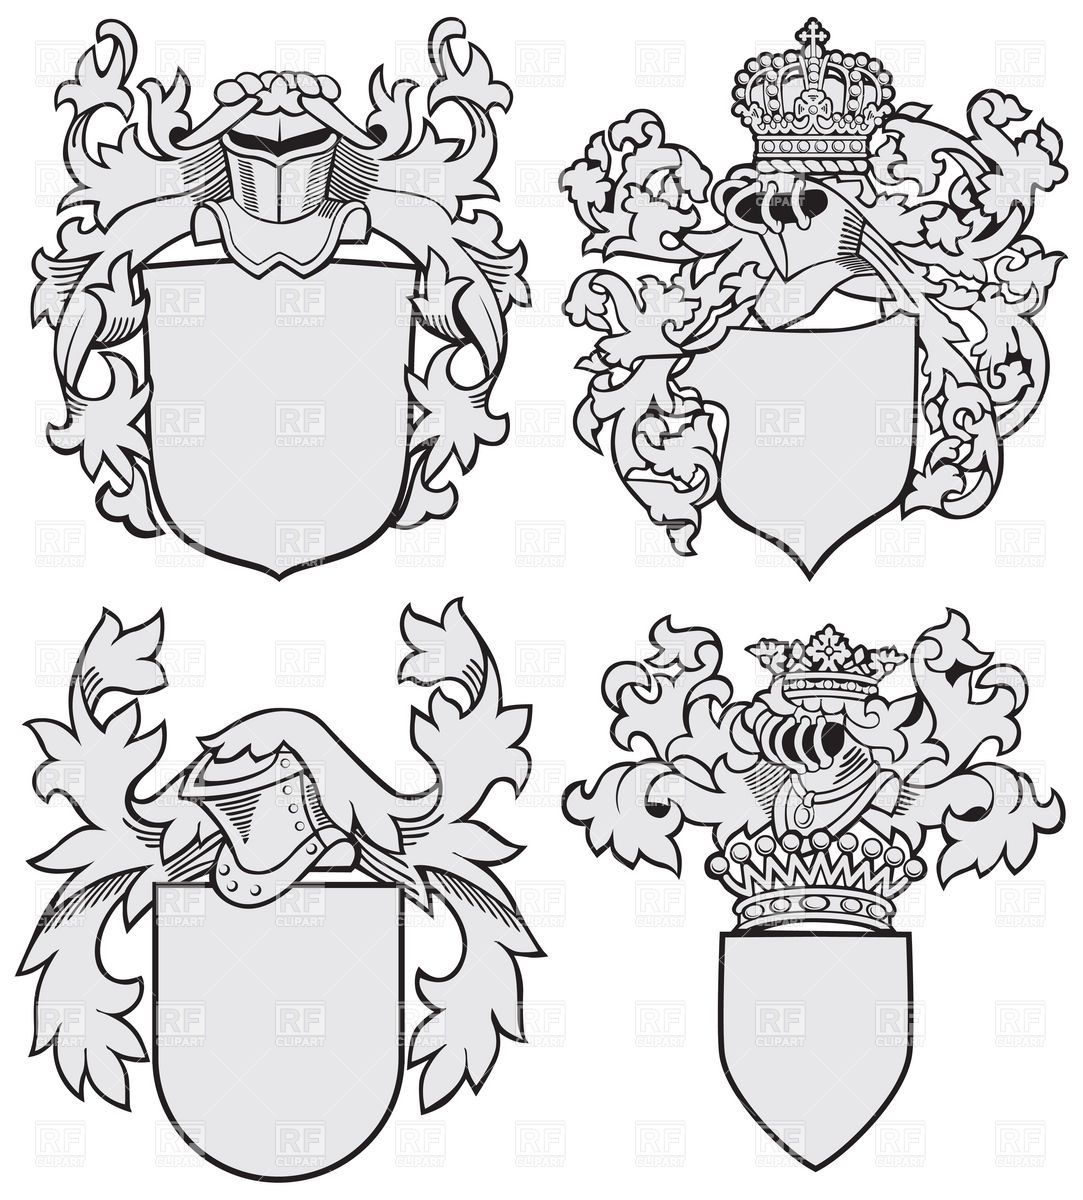 Coat arms shield.